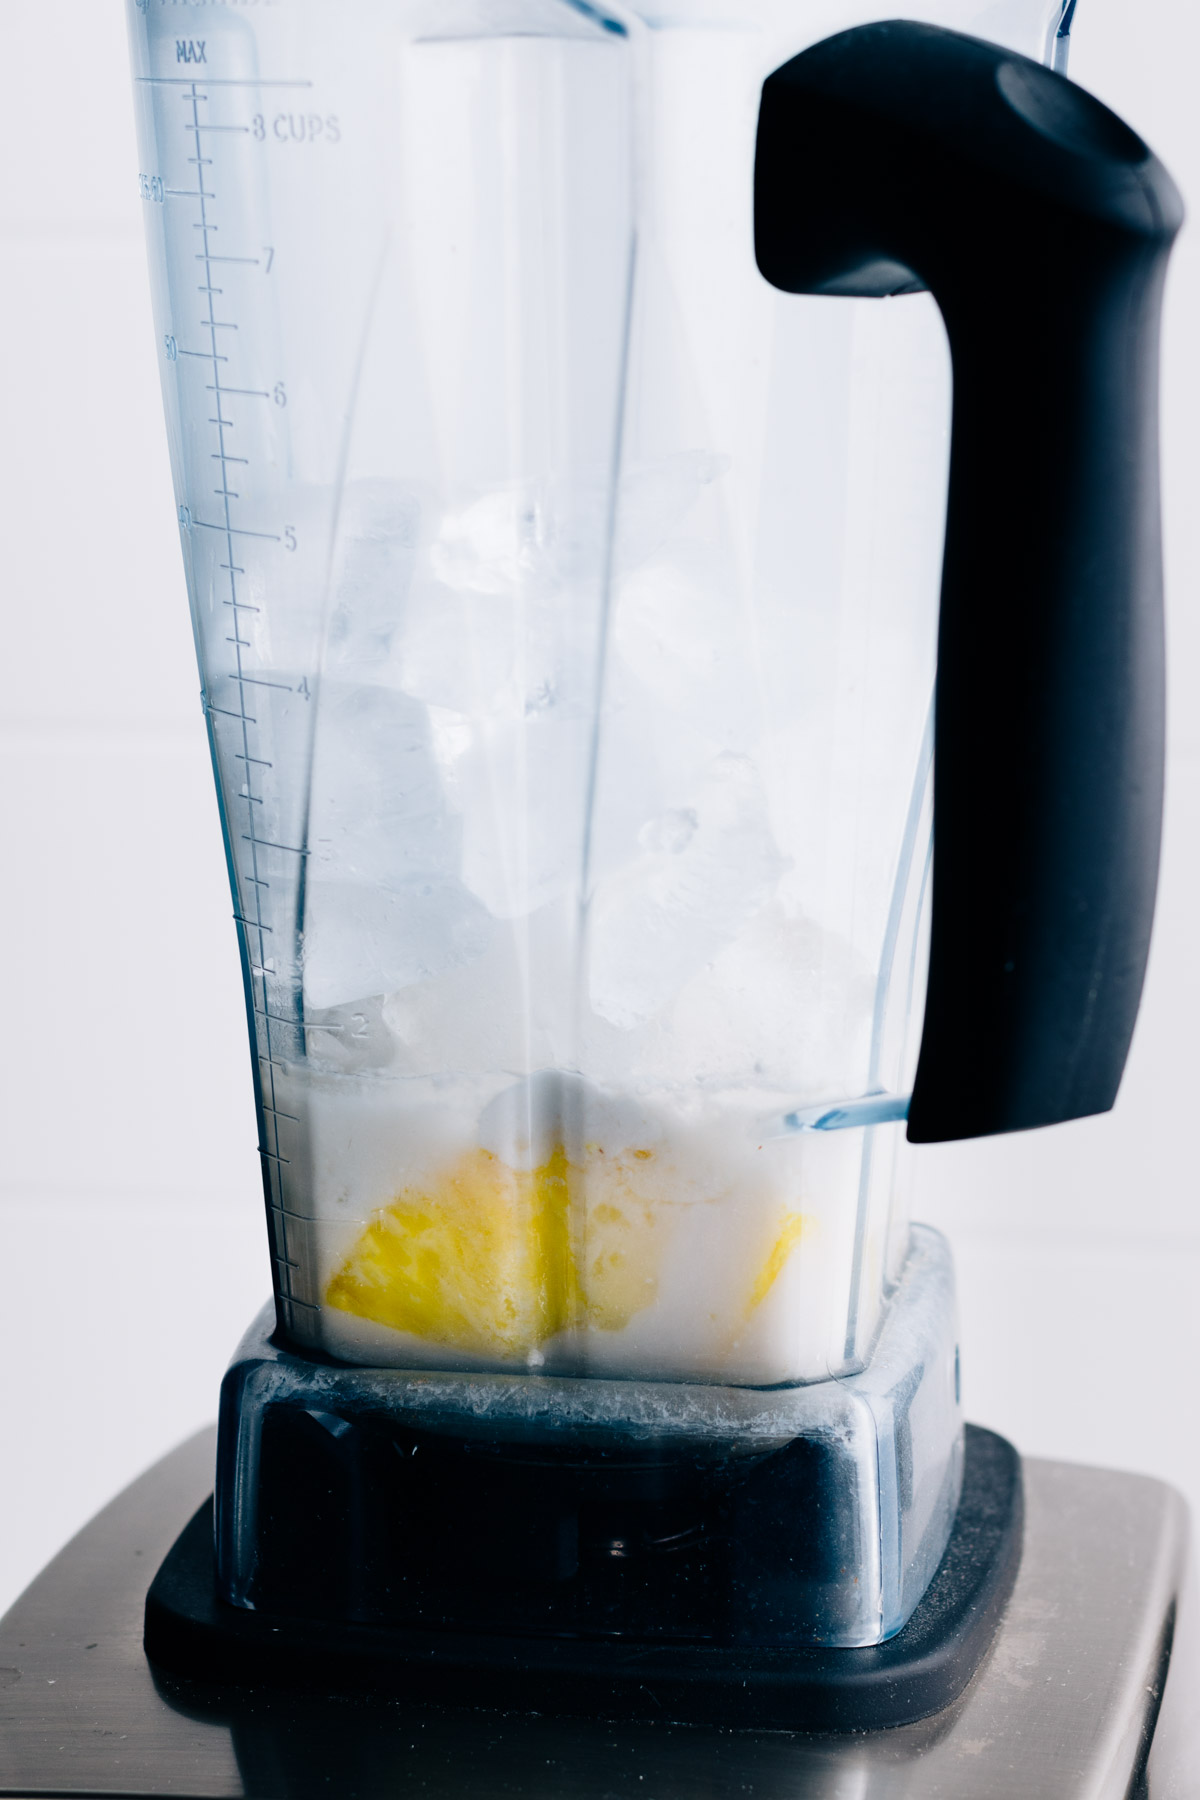 All ingredients for pina colada with ice cubes in a tall standing blender container